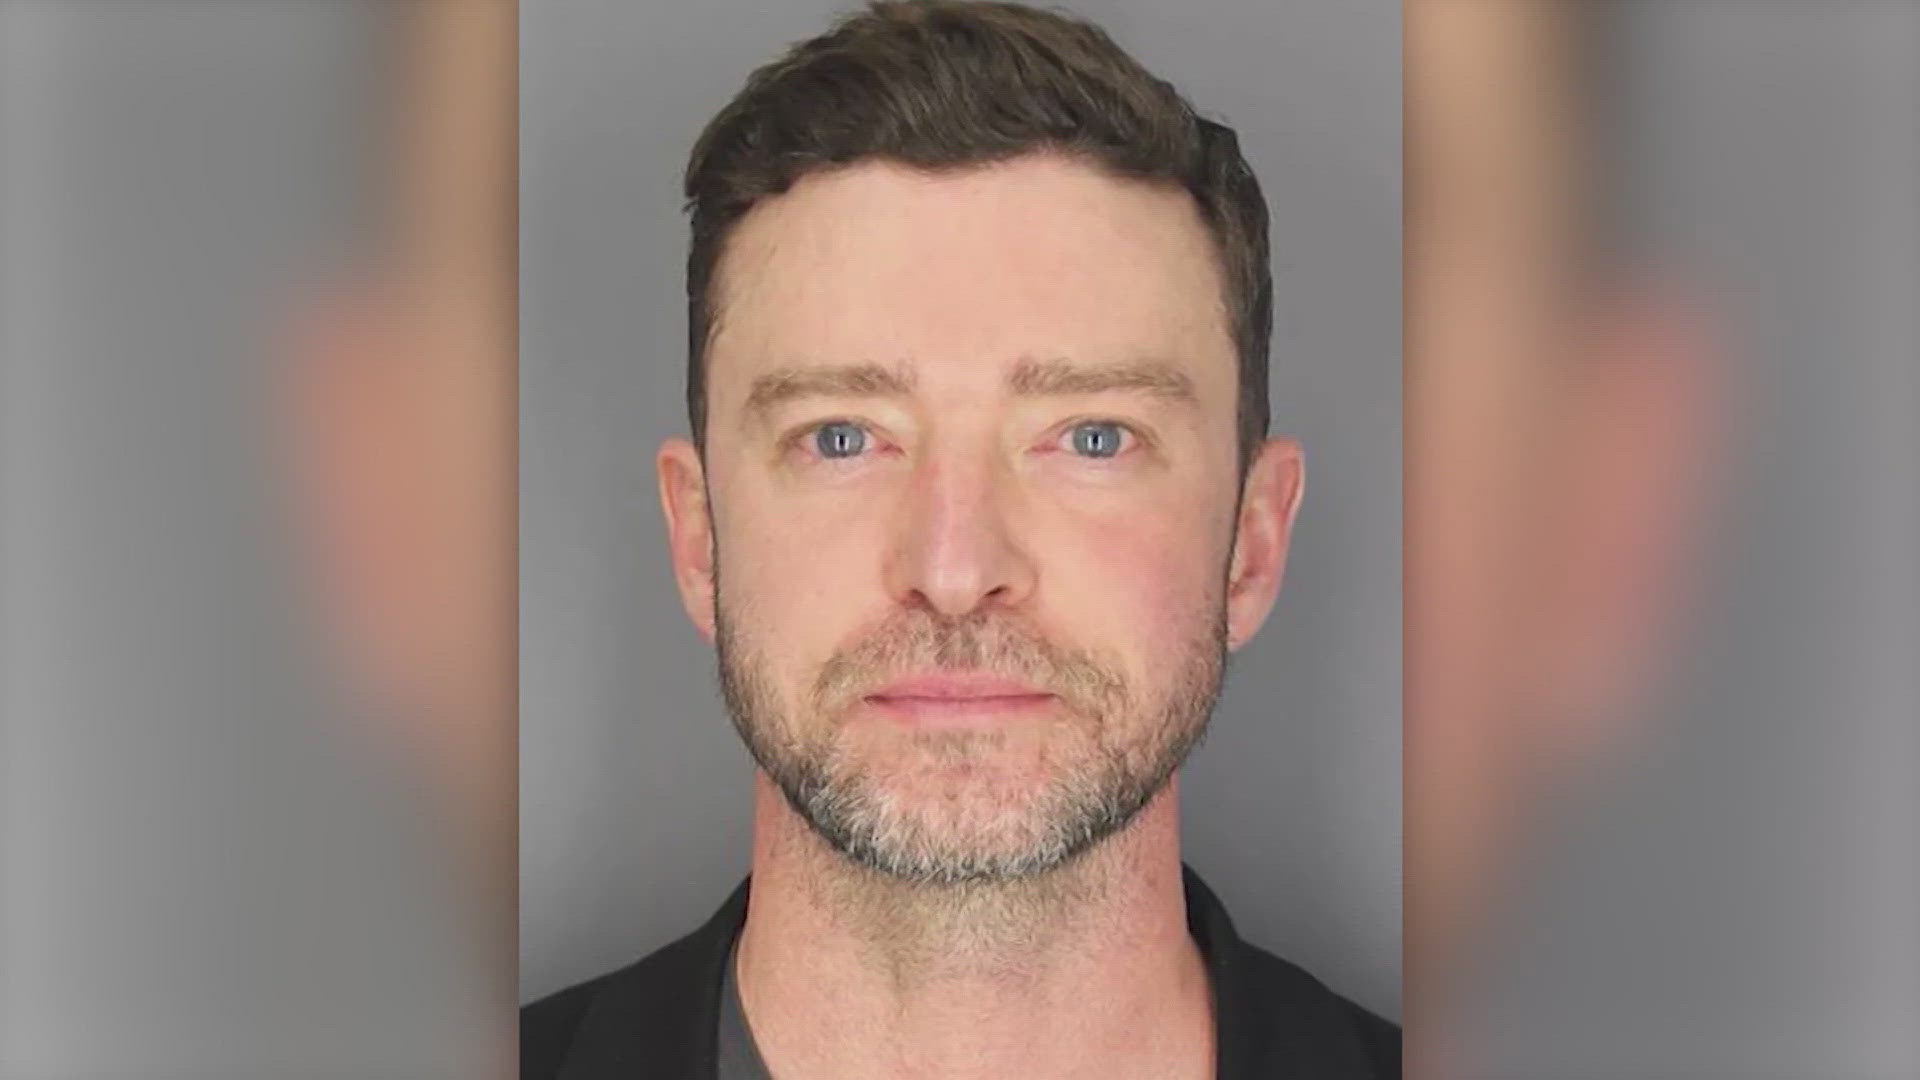 The former NSYNC singer, who is on tour in Europe, said little during the remote arraignment